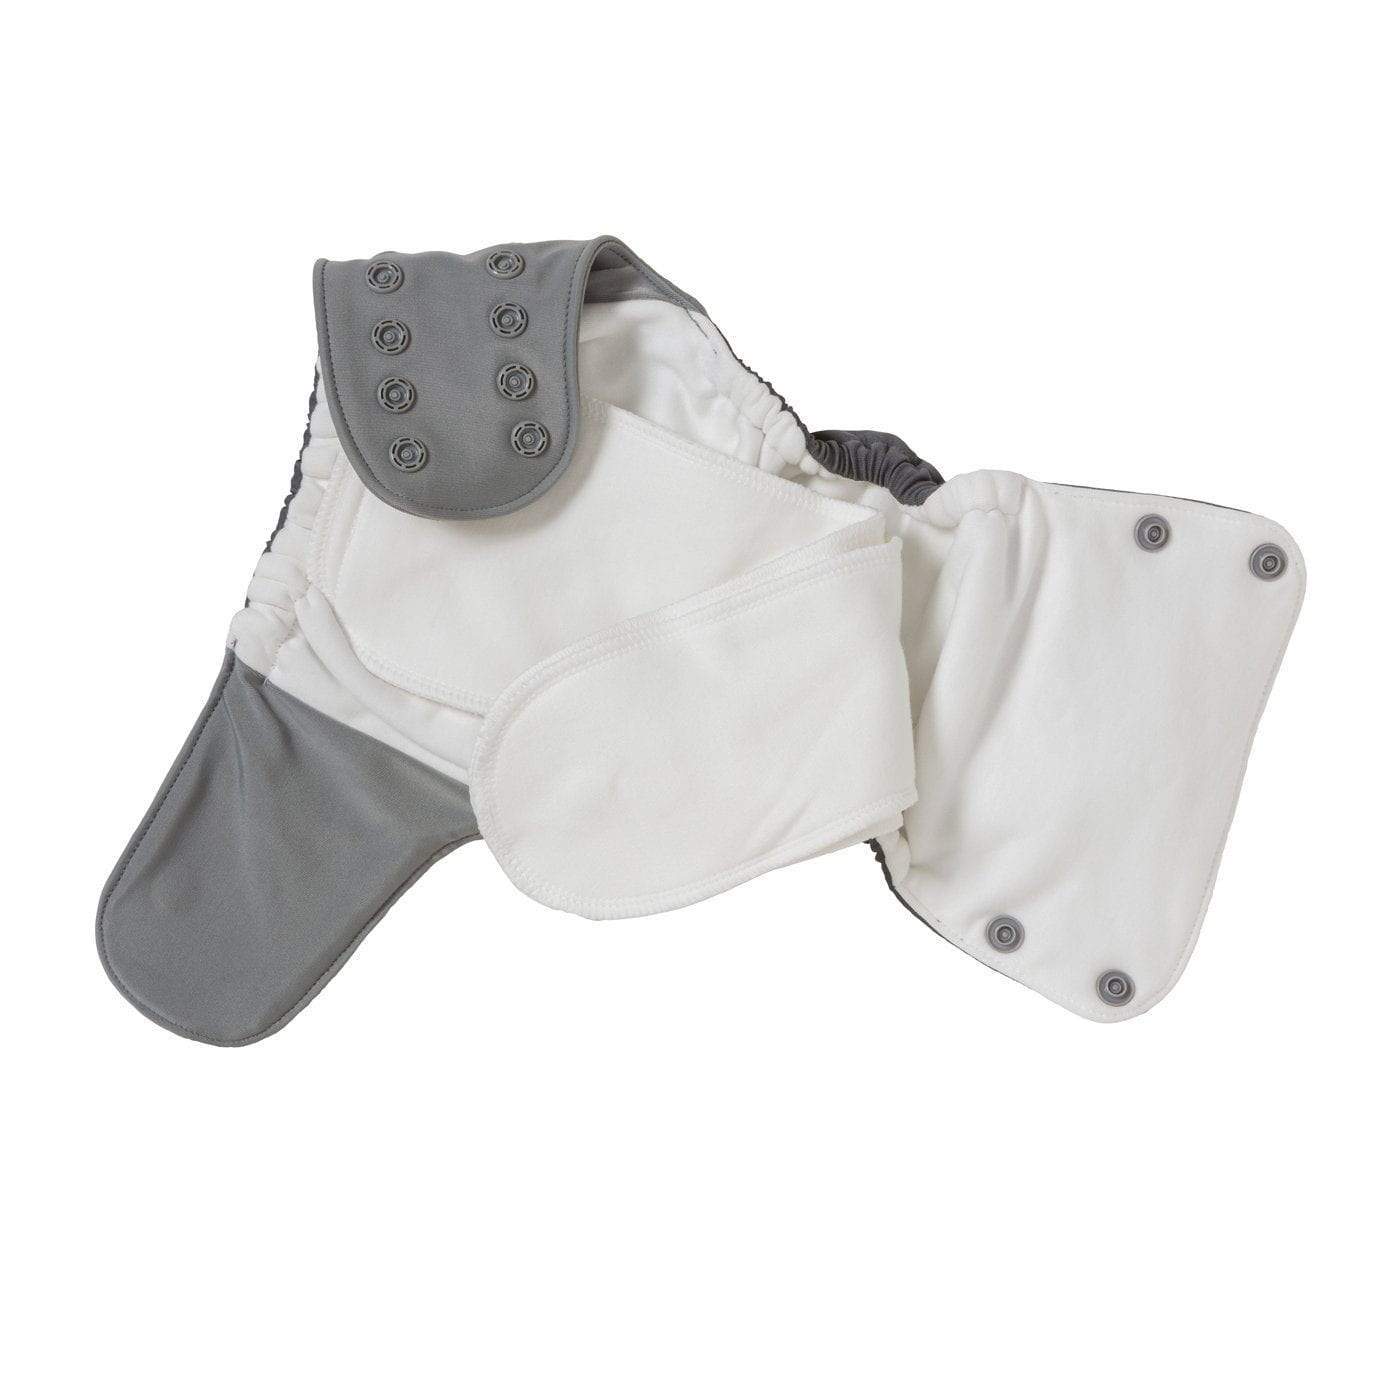 Grovia Organic All in One Nappy-All In One Nappy-Grovia-Cloud-The Nappy Market